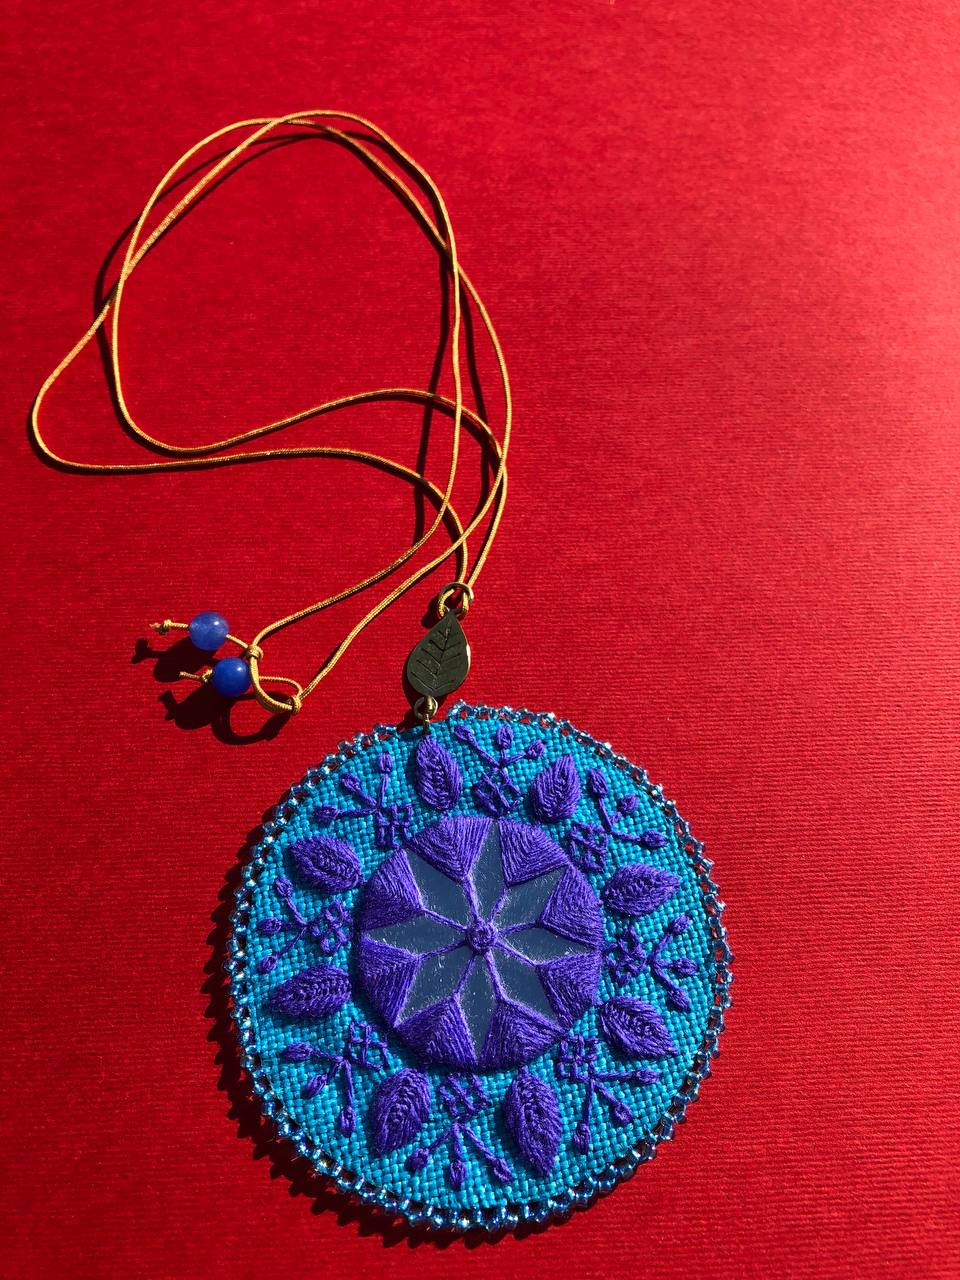 Handmade Embroidered Circular Necklace With Blue and Purple Thread